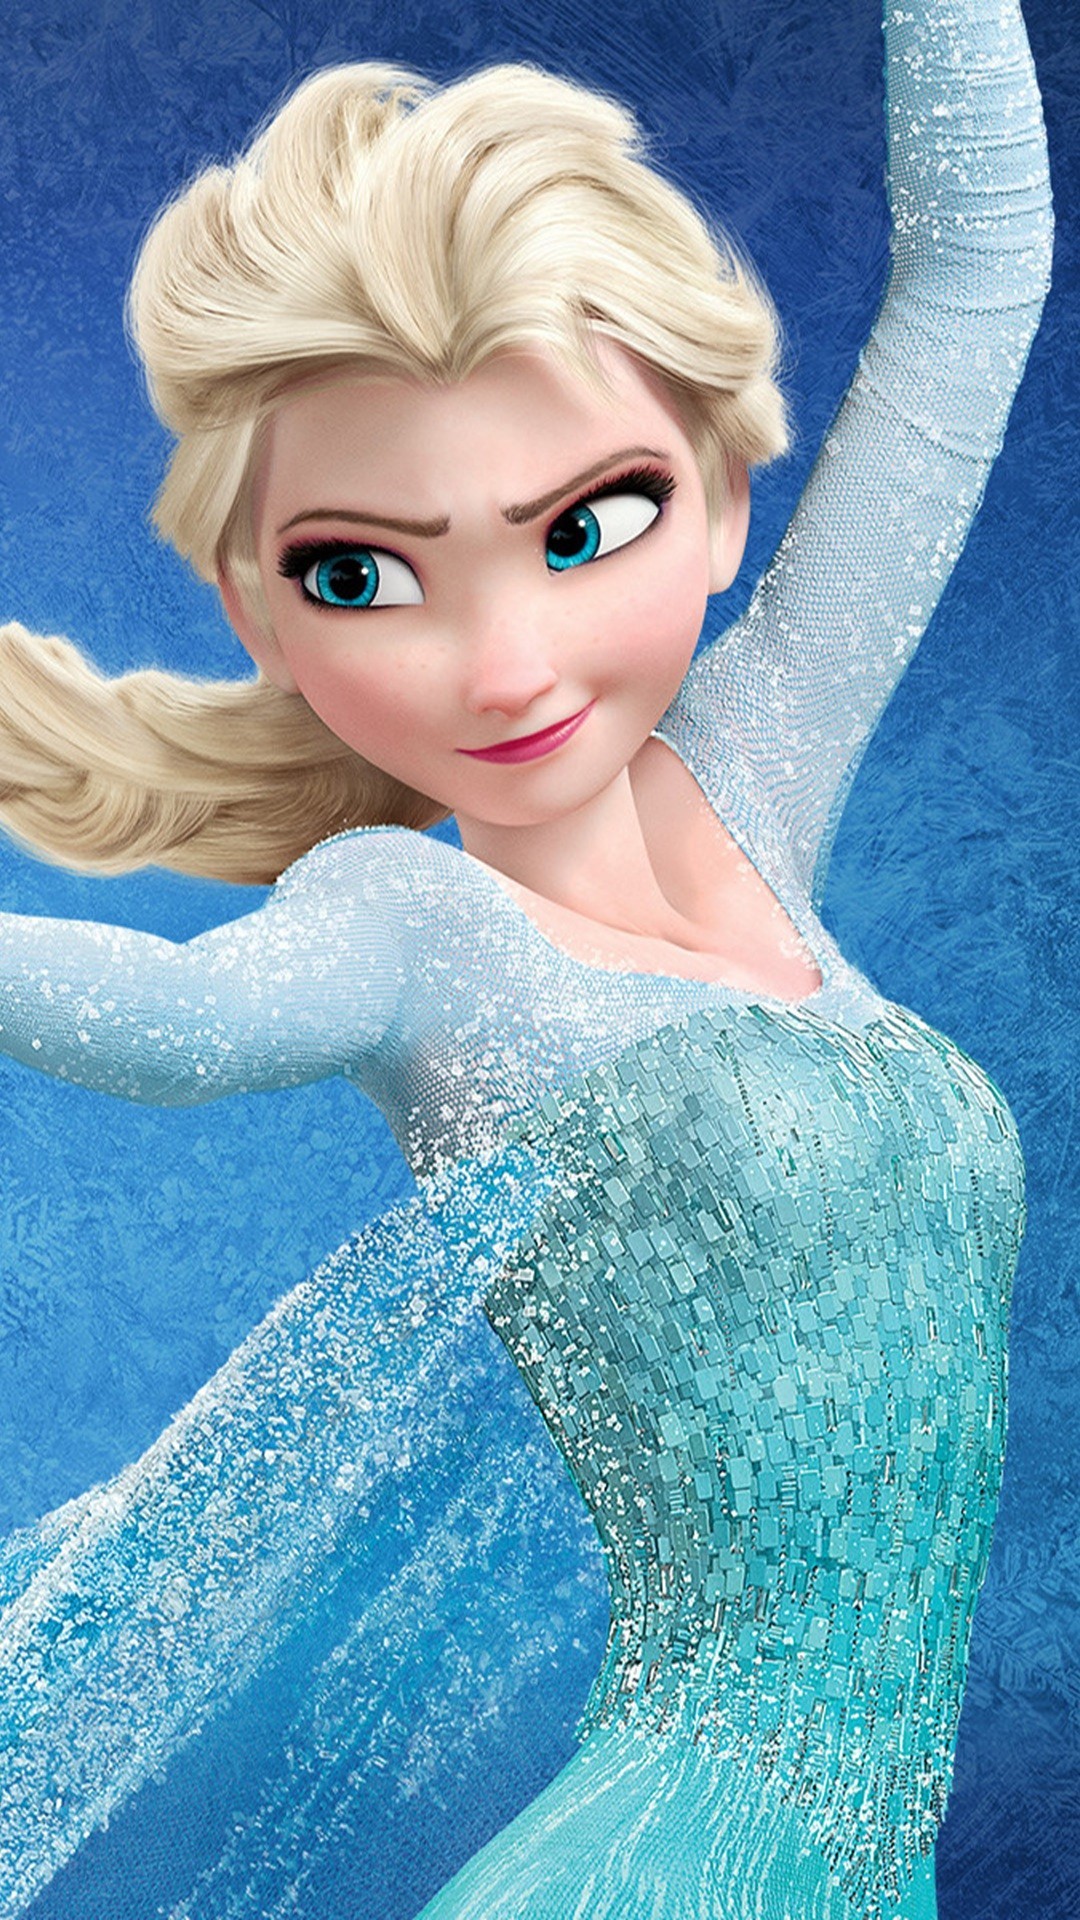 1080x1920 An Elsa wallpaper. Awesome right?